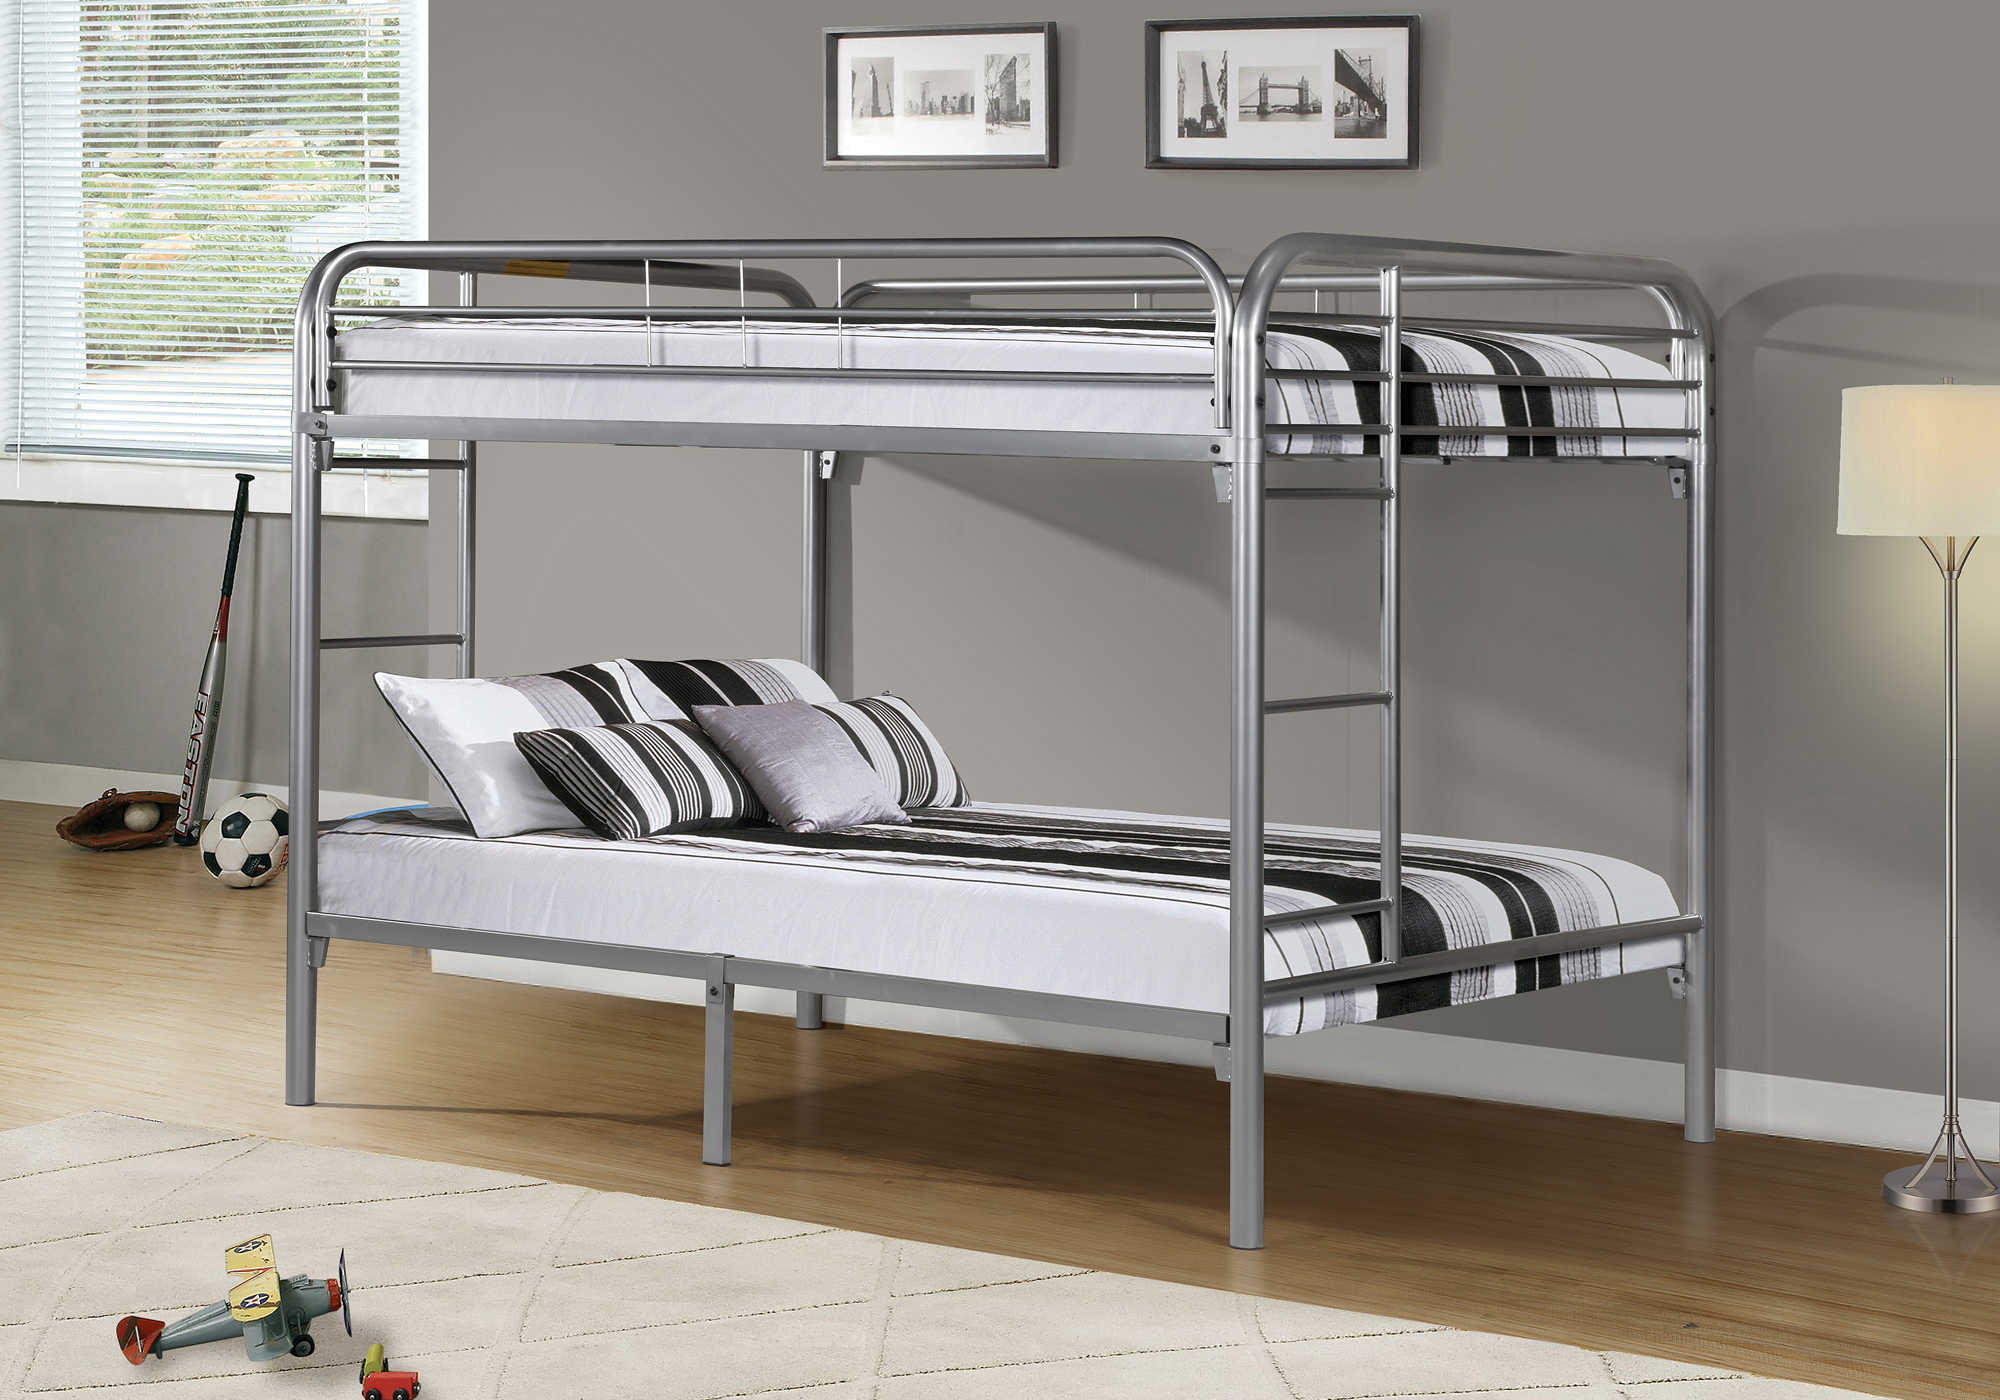 BUNK BED - FULL / FULL SIZE / SILVER METAL 